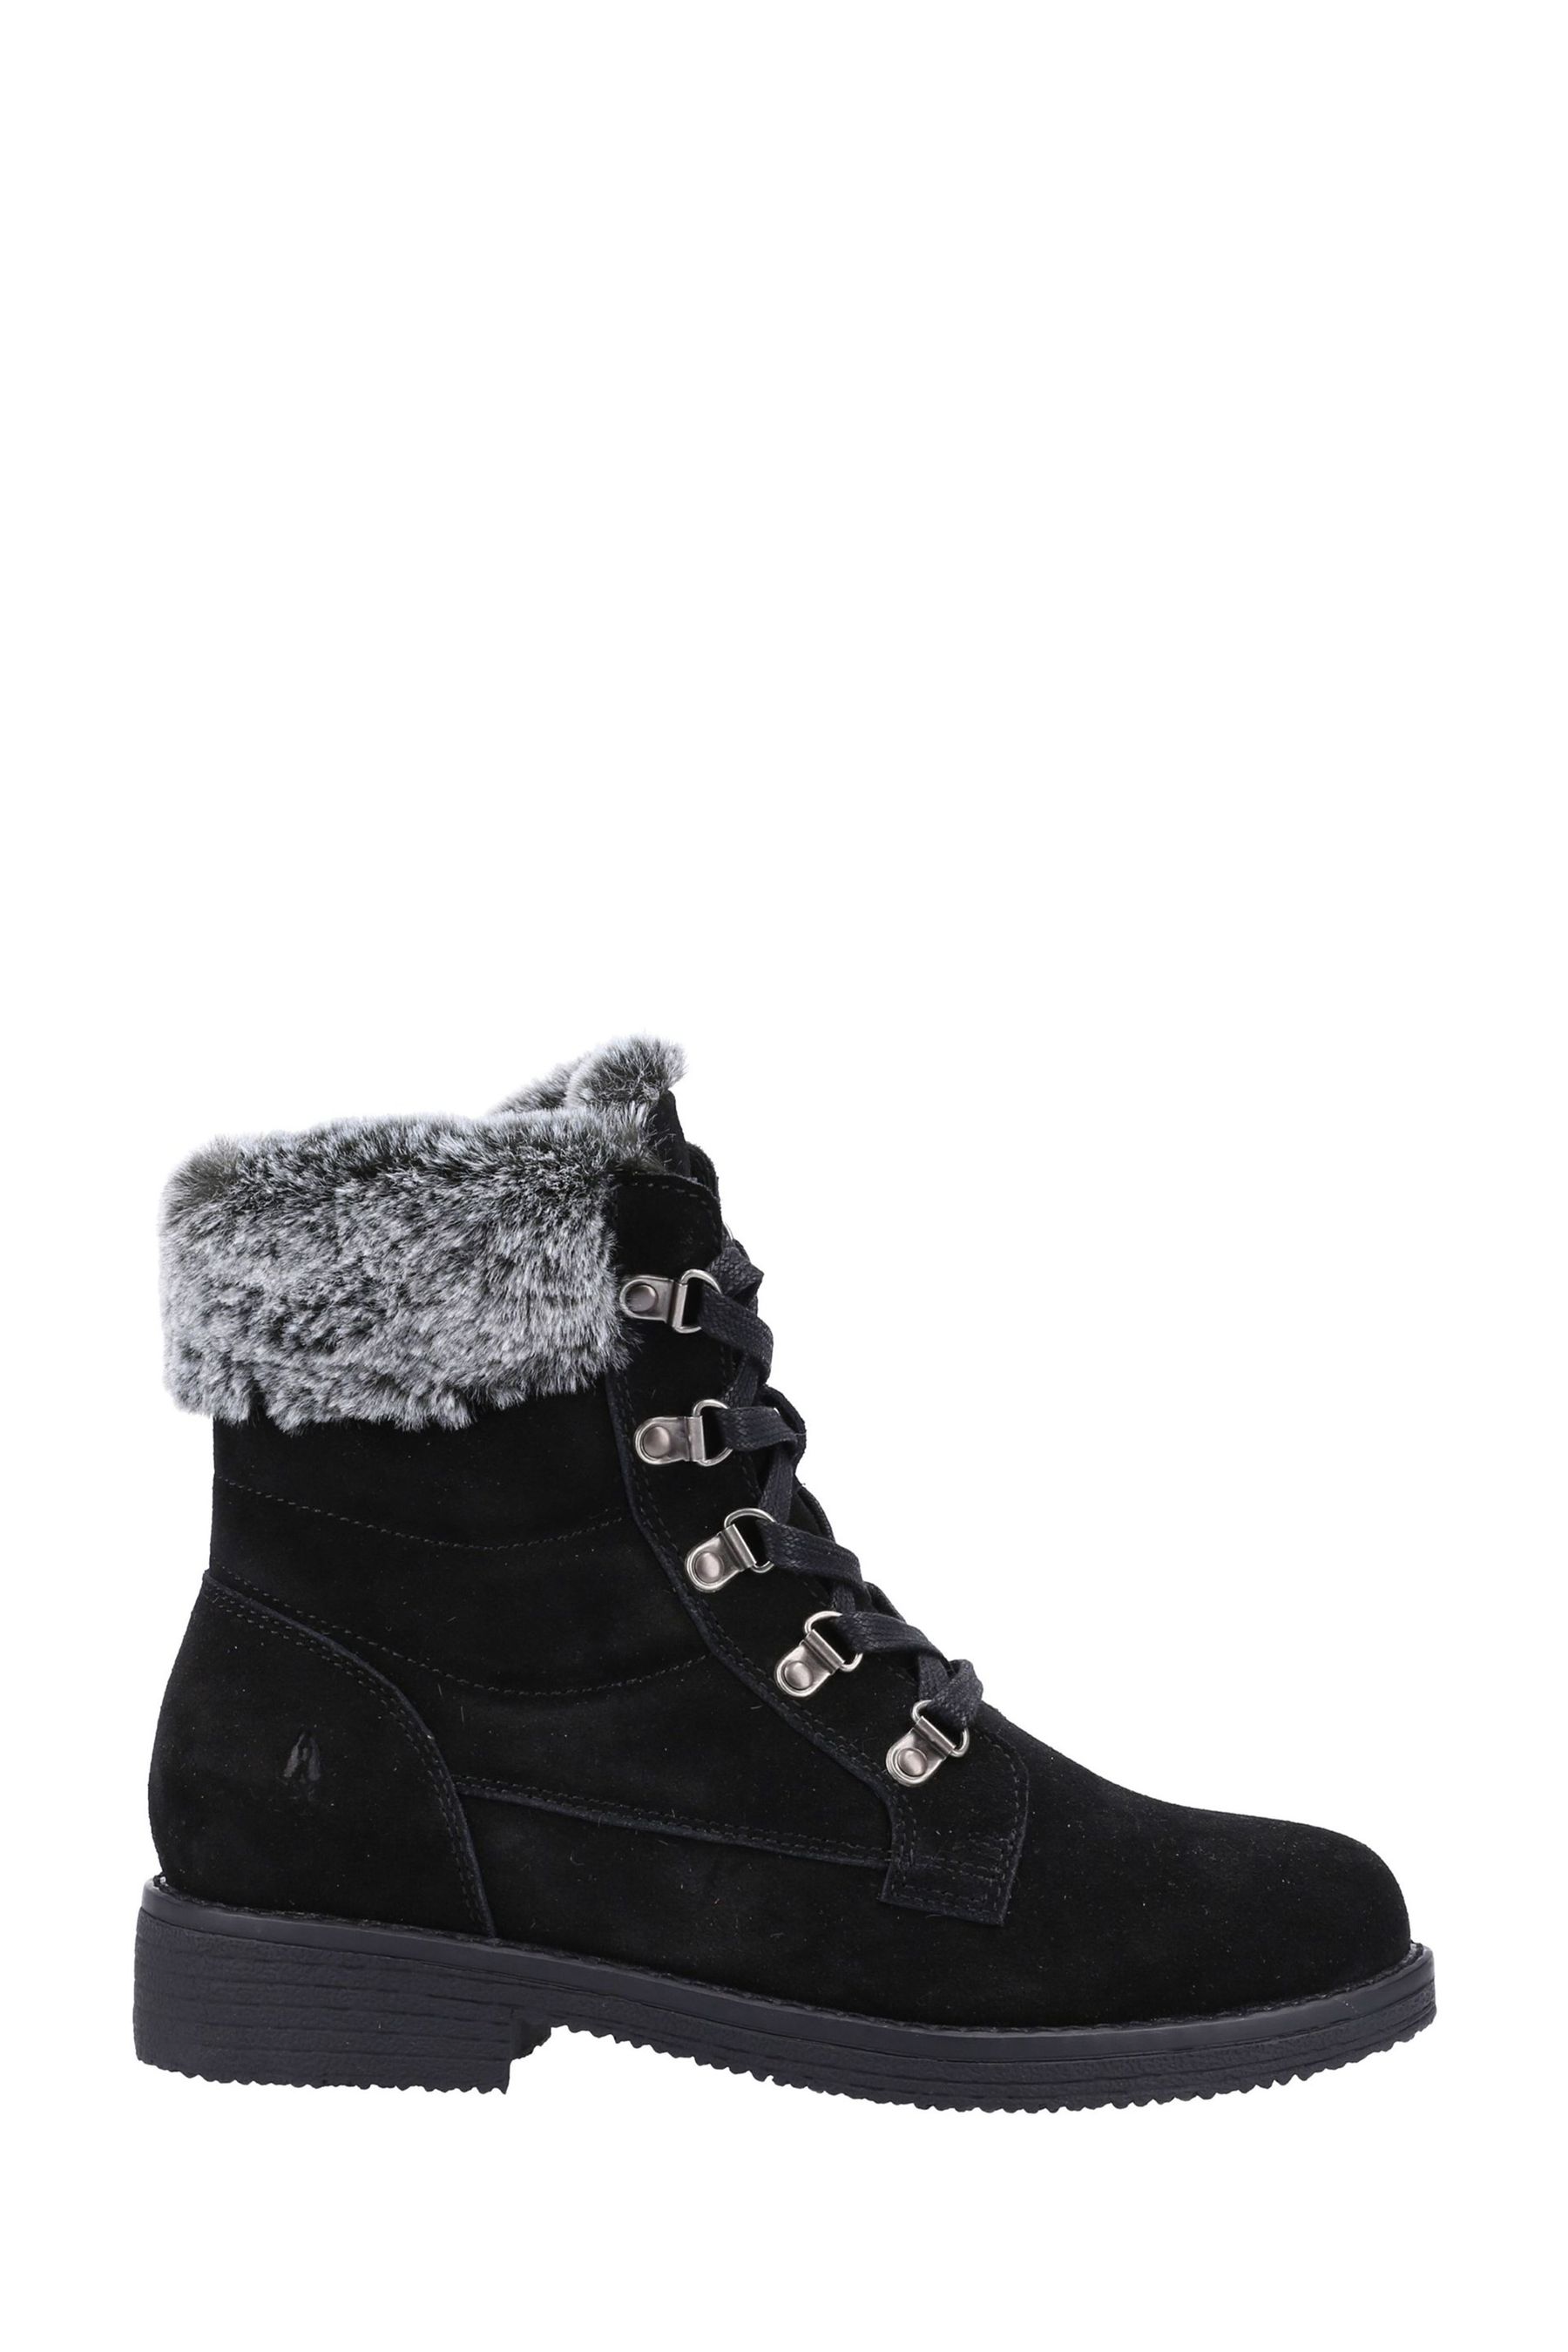 Buy Hush Puppies Black Florence Mid Boots from the Next UK online shop